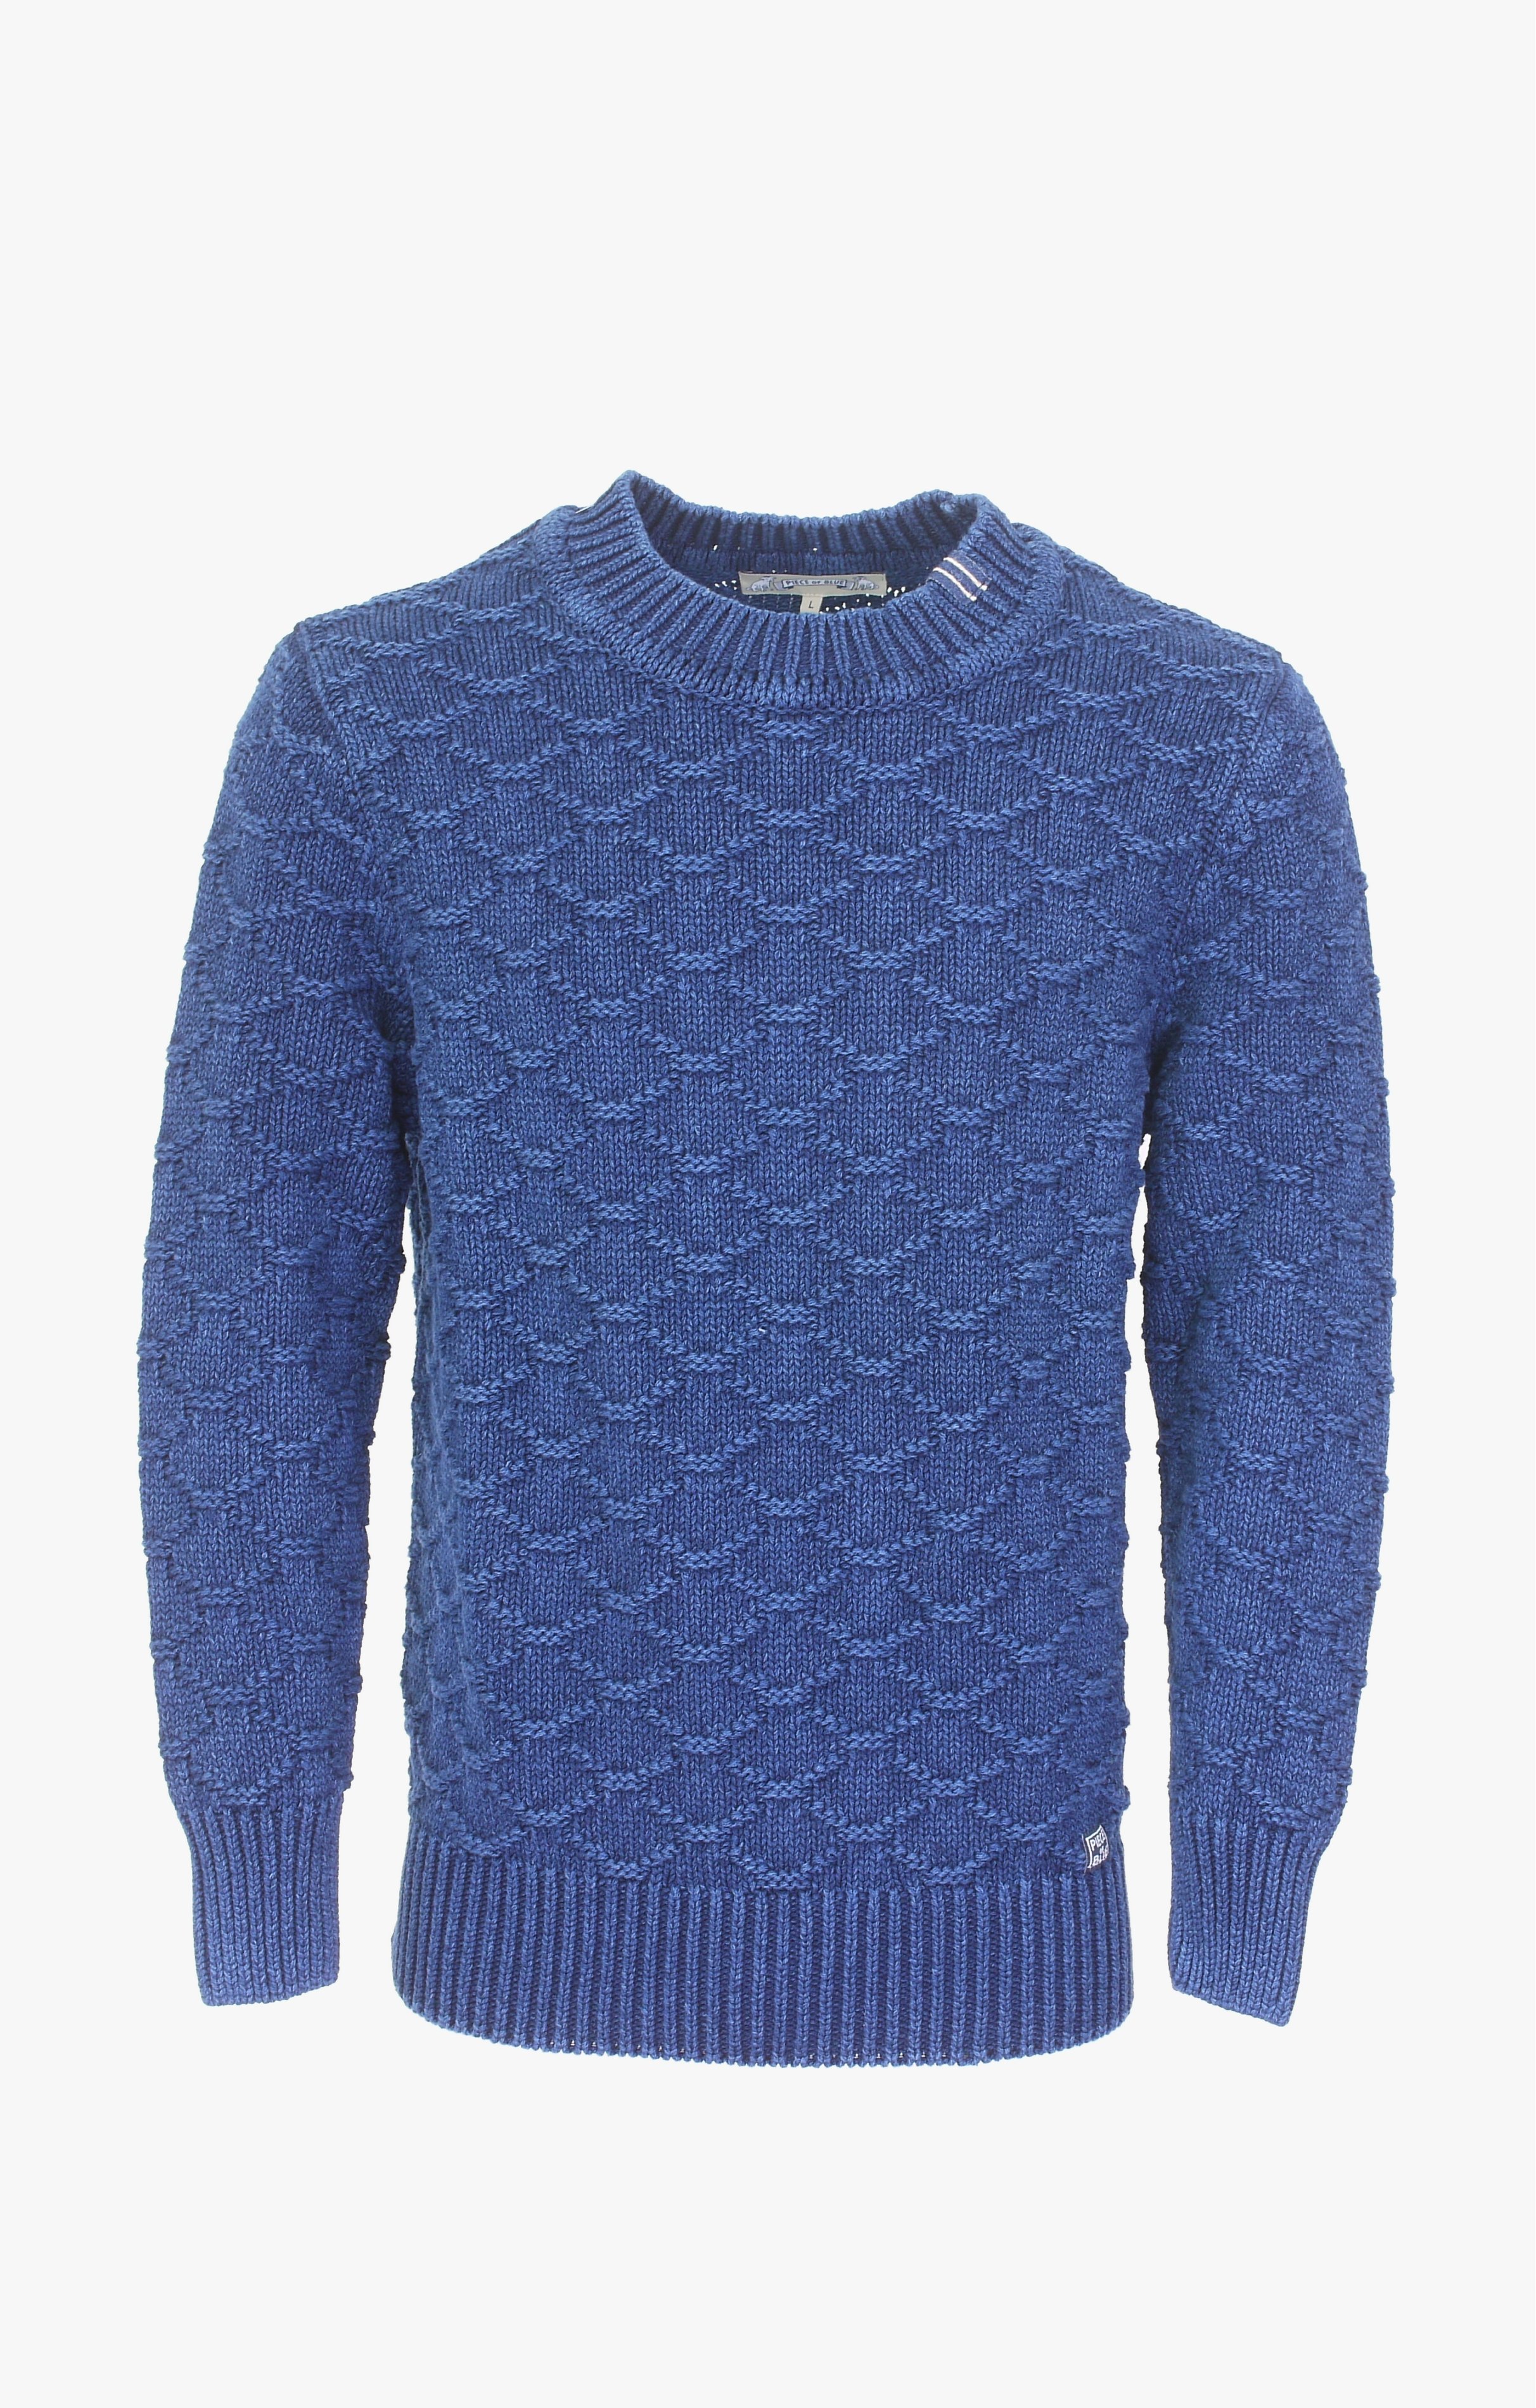 YUMMY AND COOL HEAVY KNITTED PULLOVER - INDIGO BLUE - Piece of Blue